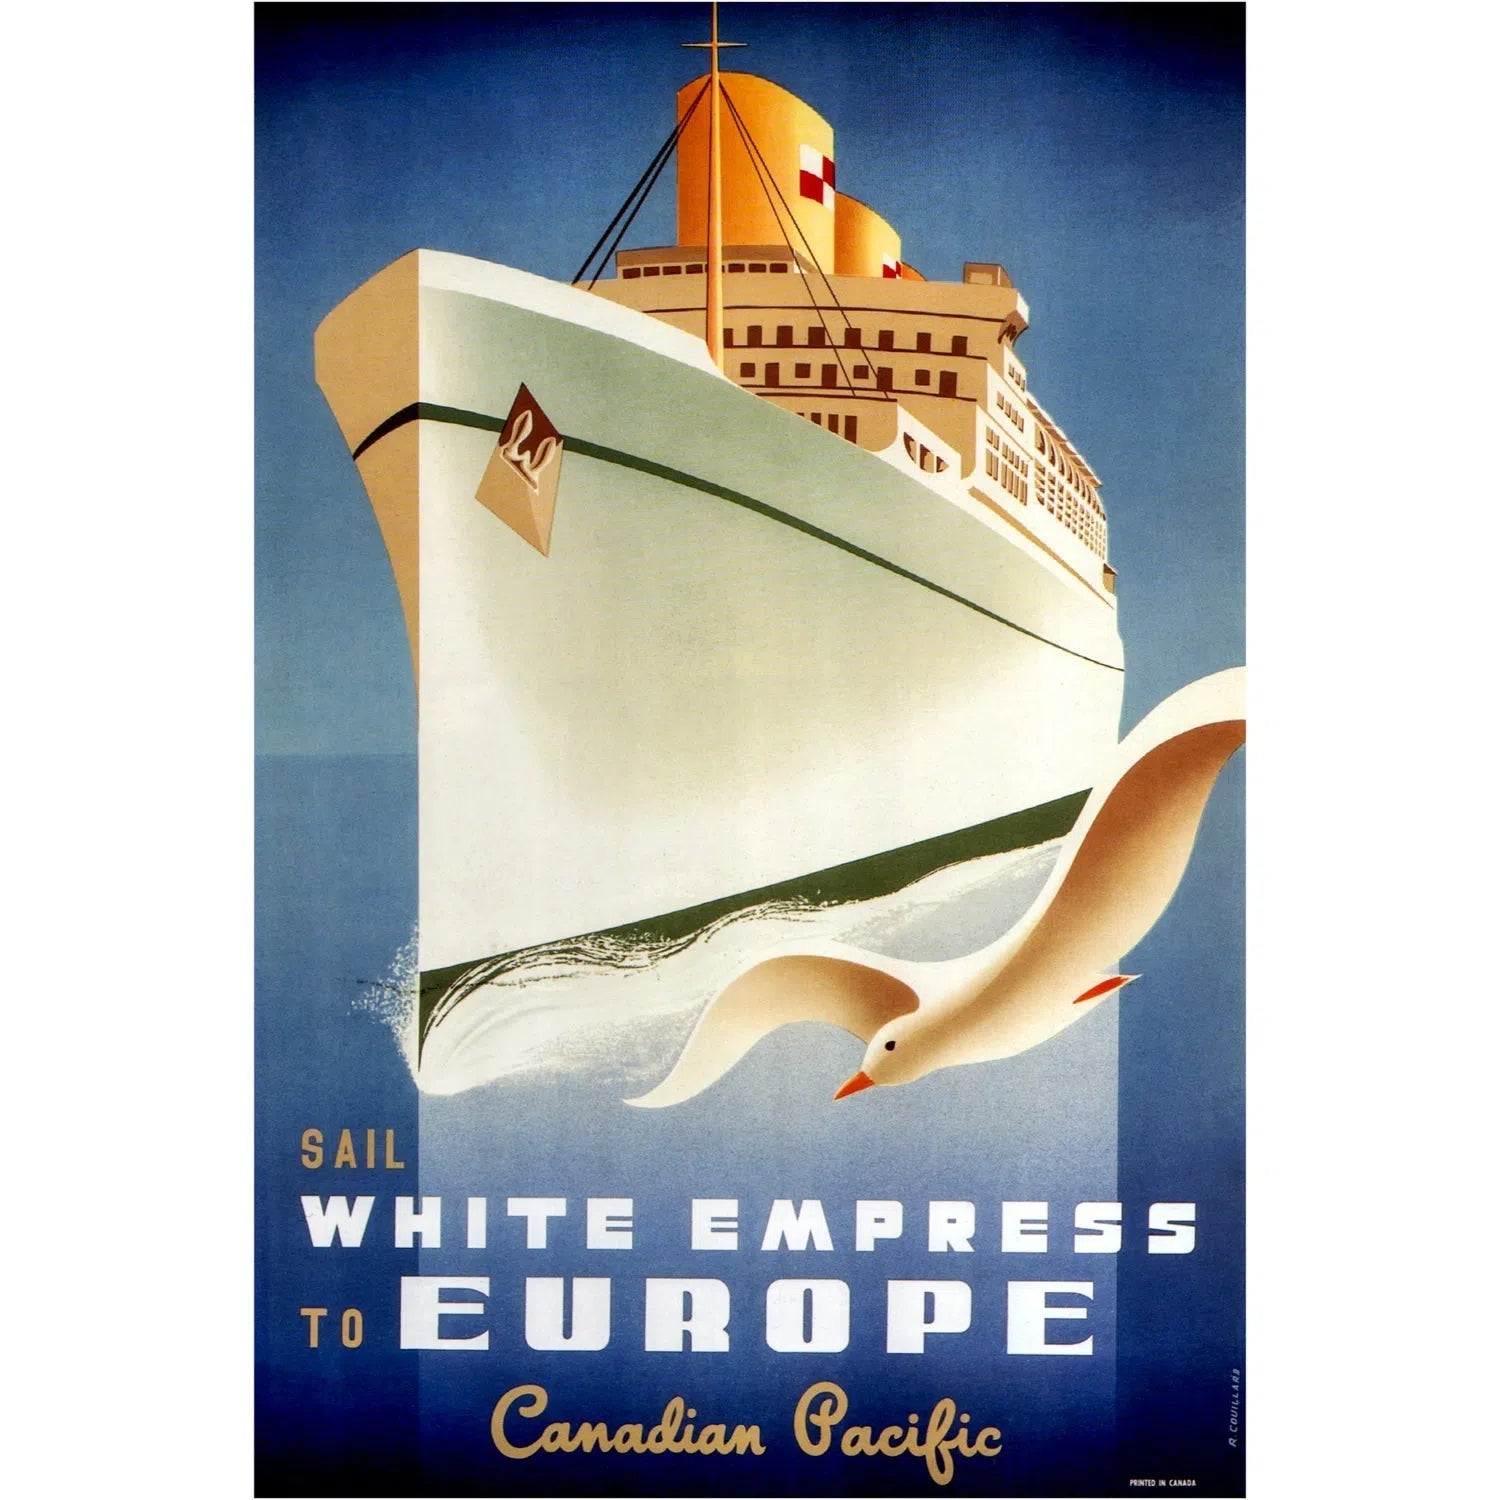 Sail white empress to Europe - Canadian pacific-Imagesdartistes